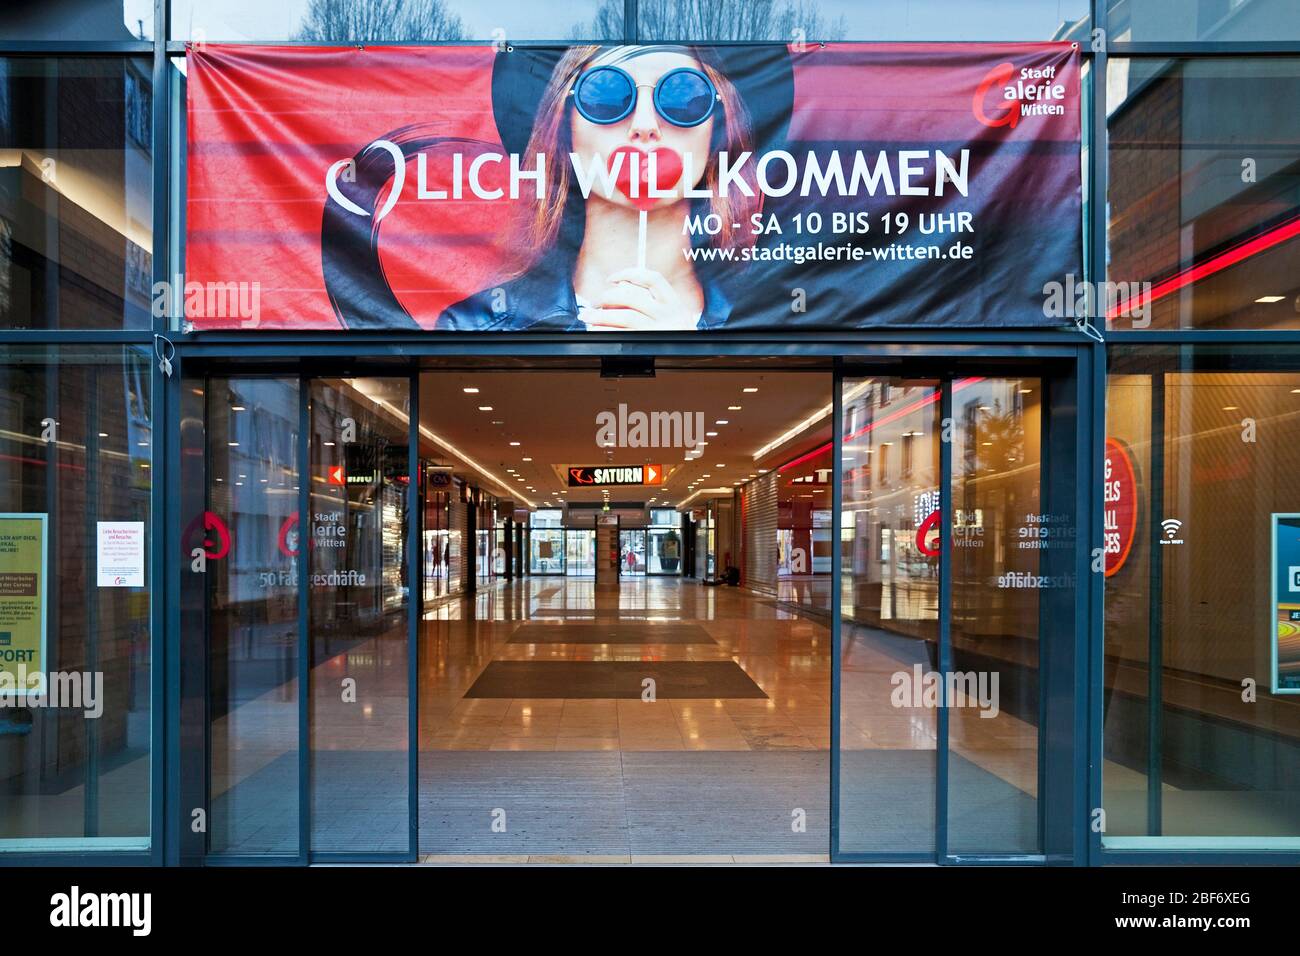 close shopping centre Stadtgalerie in Witten during corona crisis 2020, Germany, North Rhine-Westphalia, Ruhr Area, Witten Stock Photo